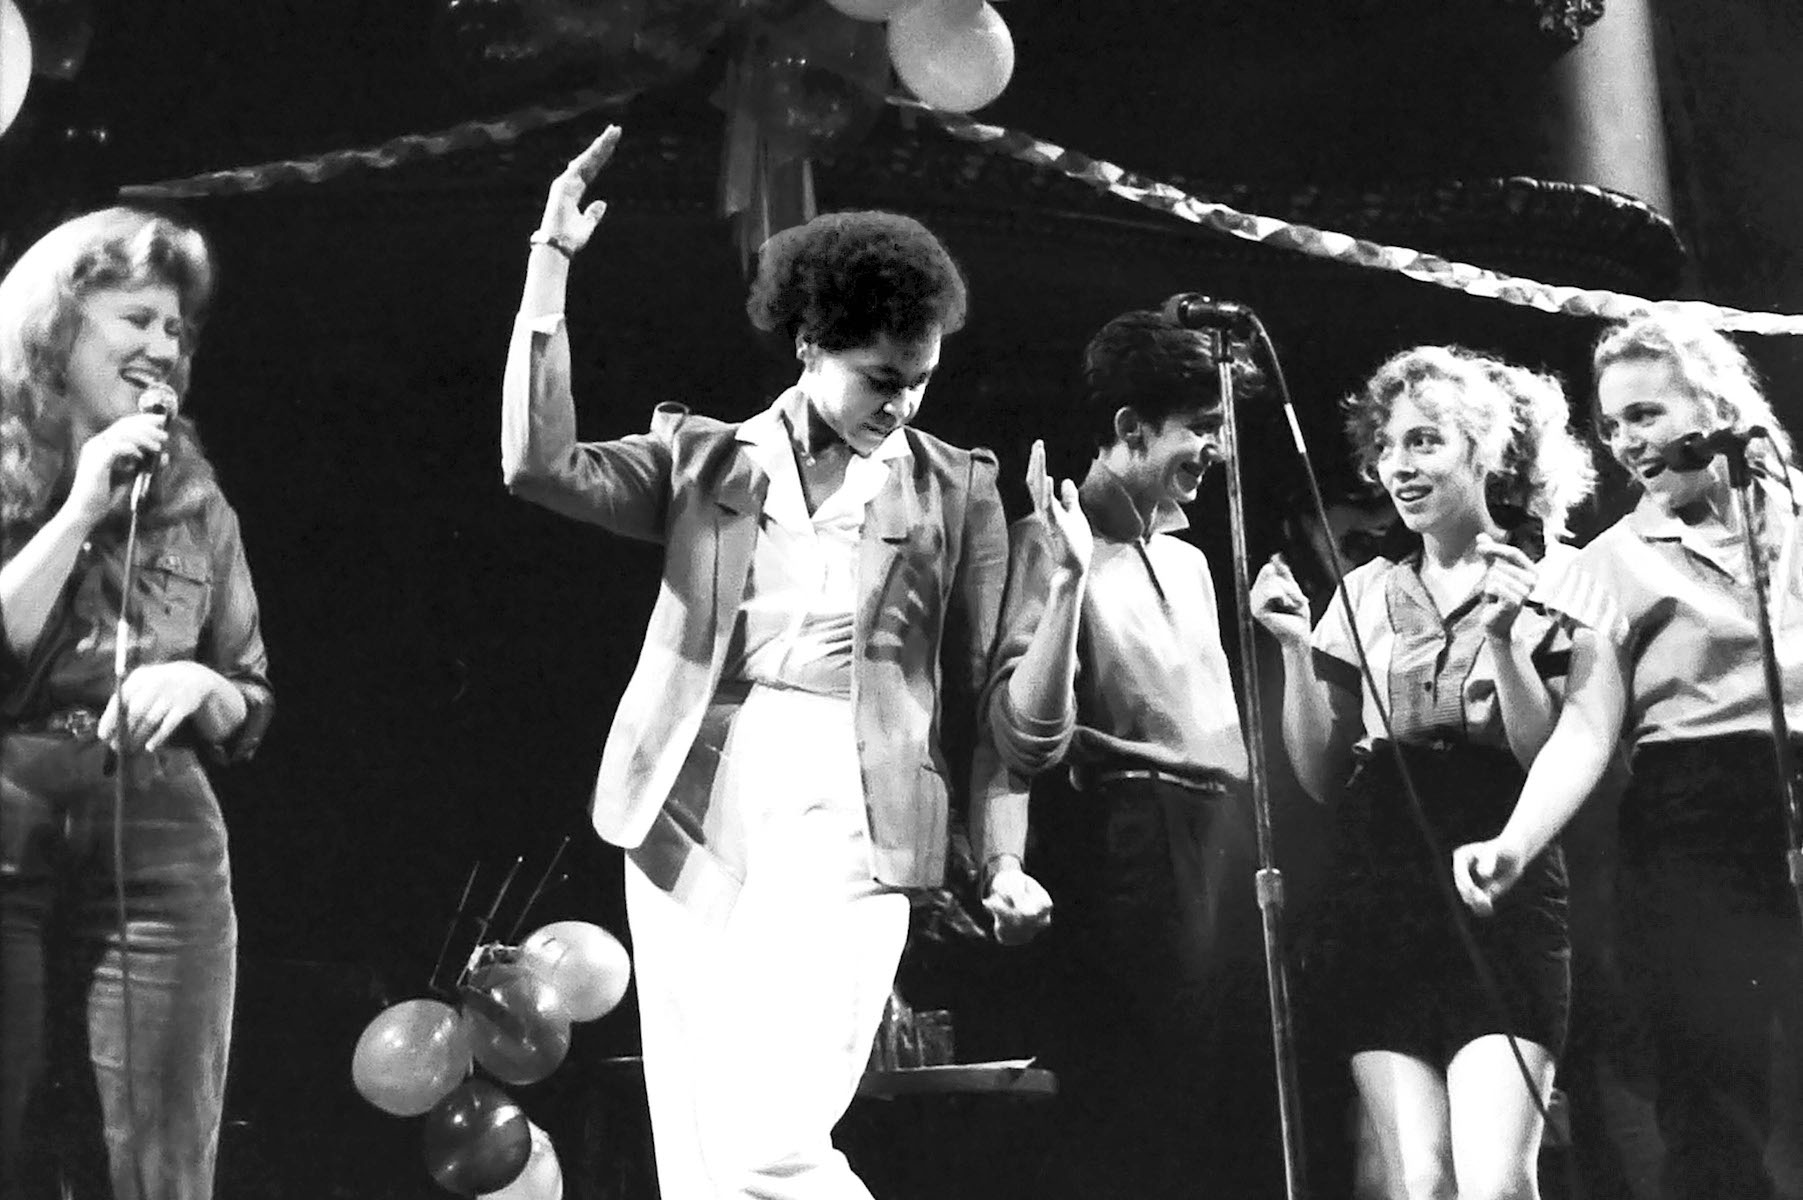 Holly Near, Linda Tillery, Adrian Torf, Barbra Higby, and Teresa Trull performing at the Great American Music Hall, San Francisco, CA, 1984. Photo Credit: J.A. Rubino. Photo courtesy of Holly Near.